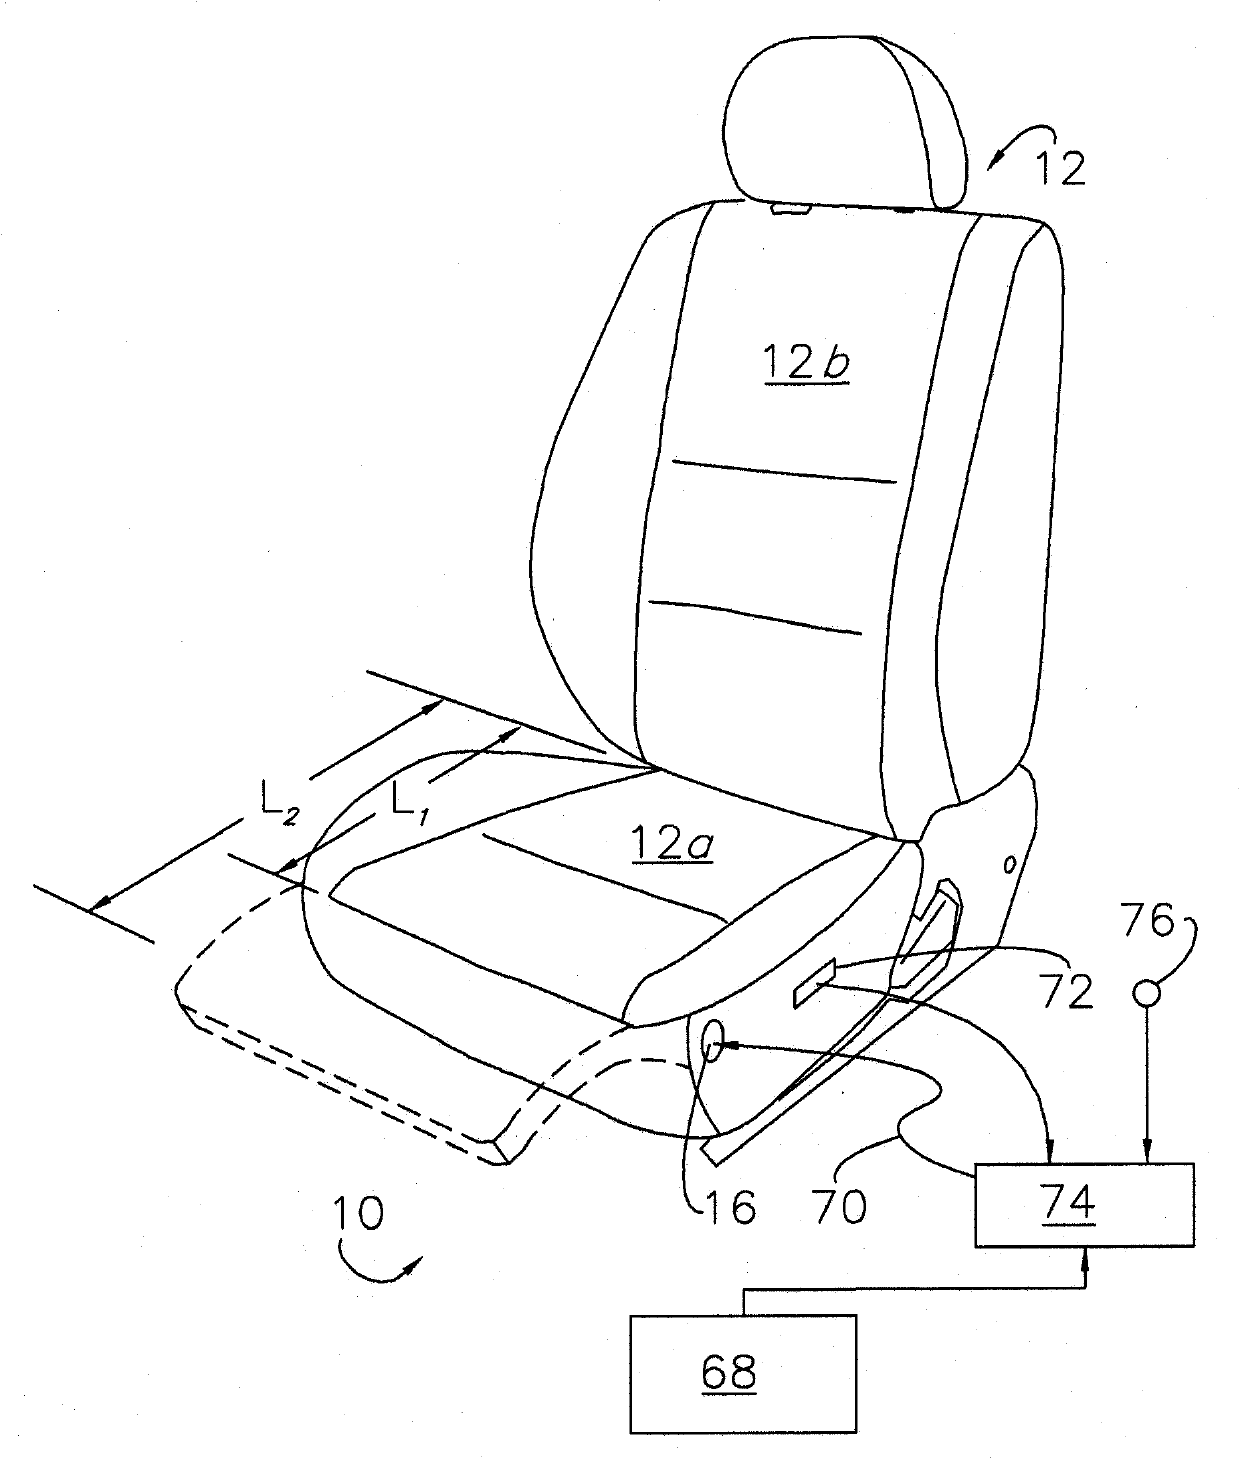 Active material actuated seat base extender